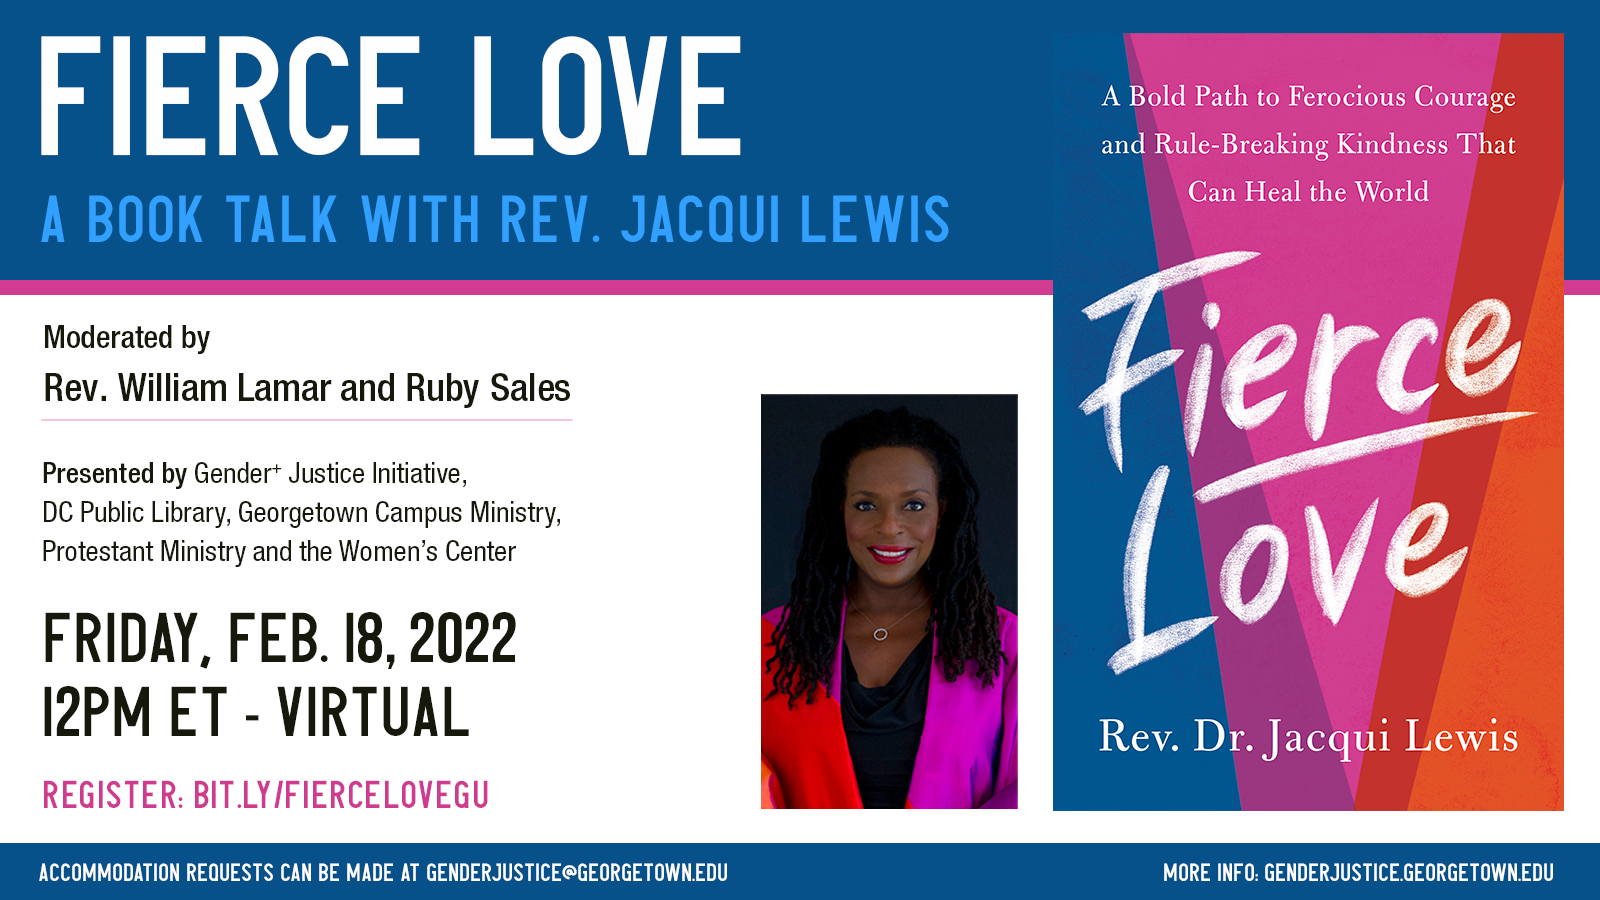 Fierce Love Event Flyer - Featuures details and pictures of book and author